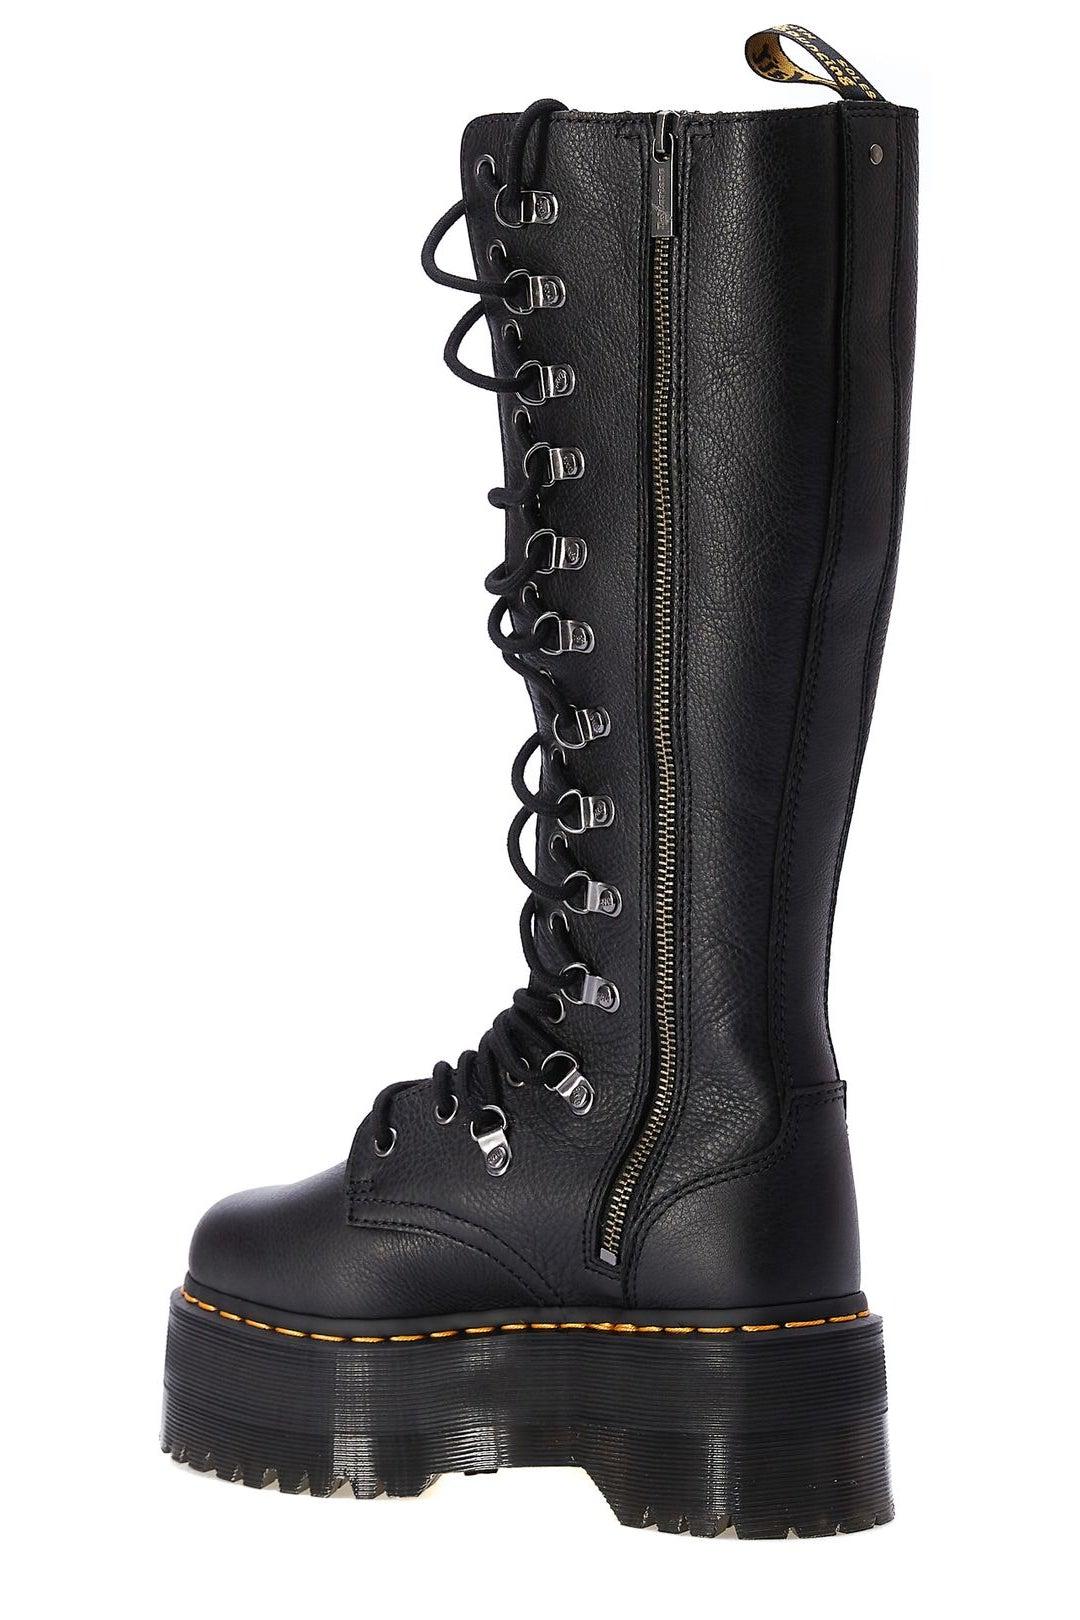 Ánimo Representar Remolque Dr. Martens 1b60 Max Hardware Knee-high Boots in Black | Lyst